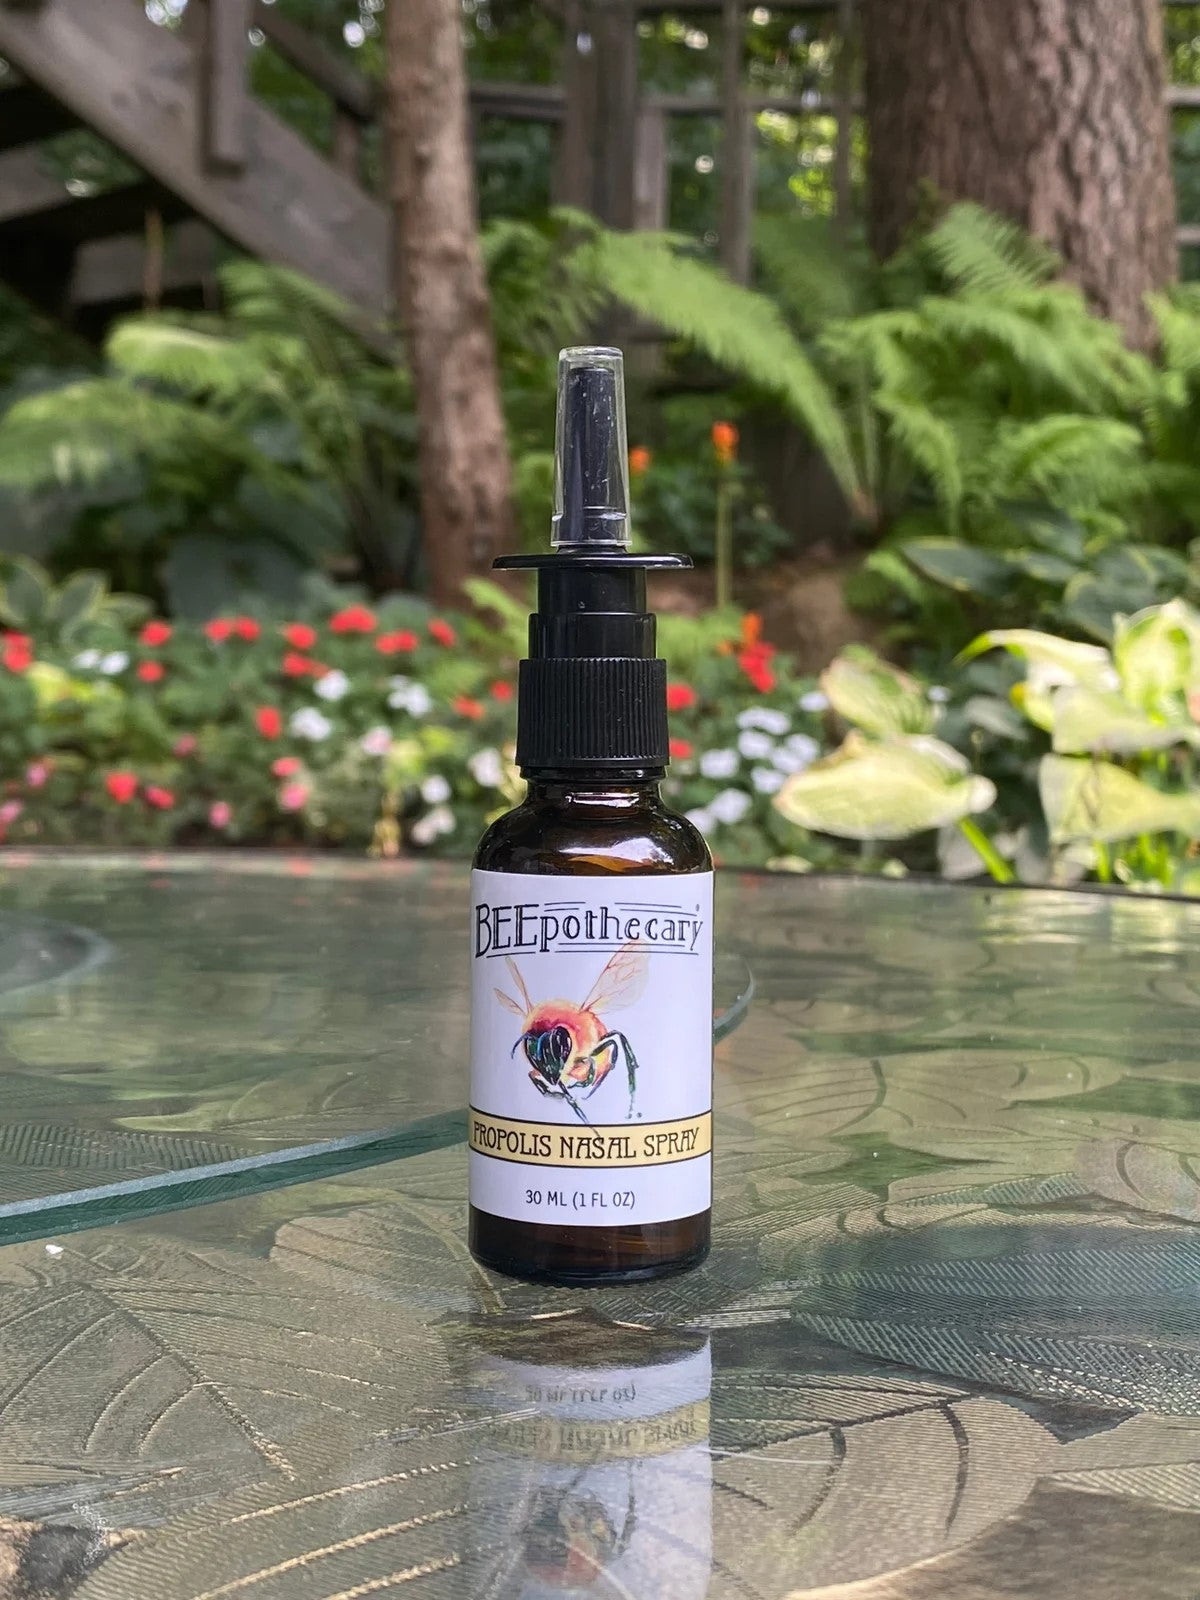 BEEpothecary propolis nasal spray 30 ml brown bottle with white label